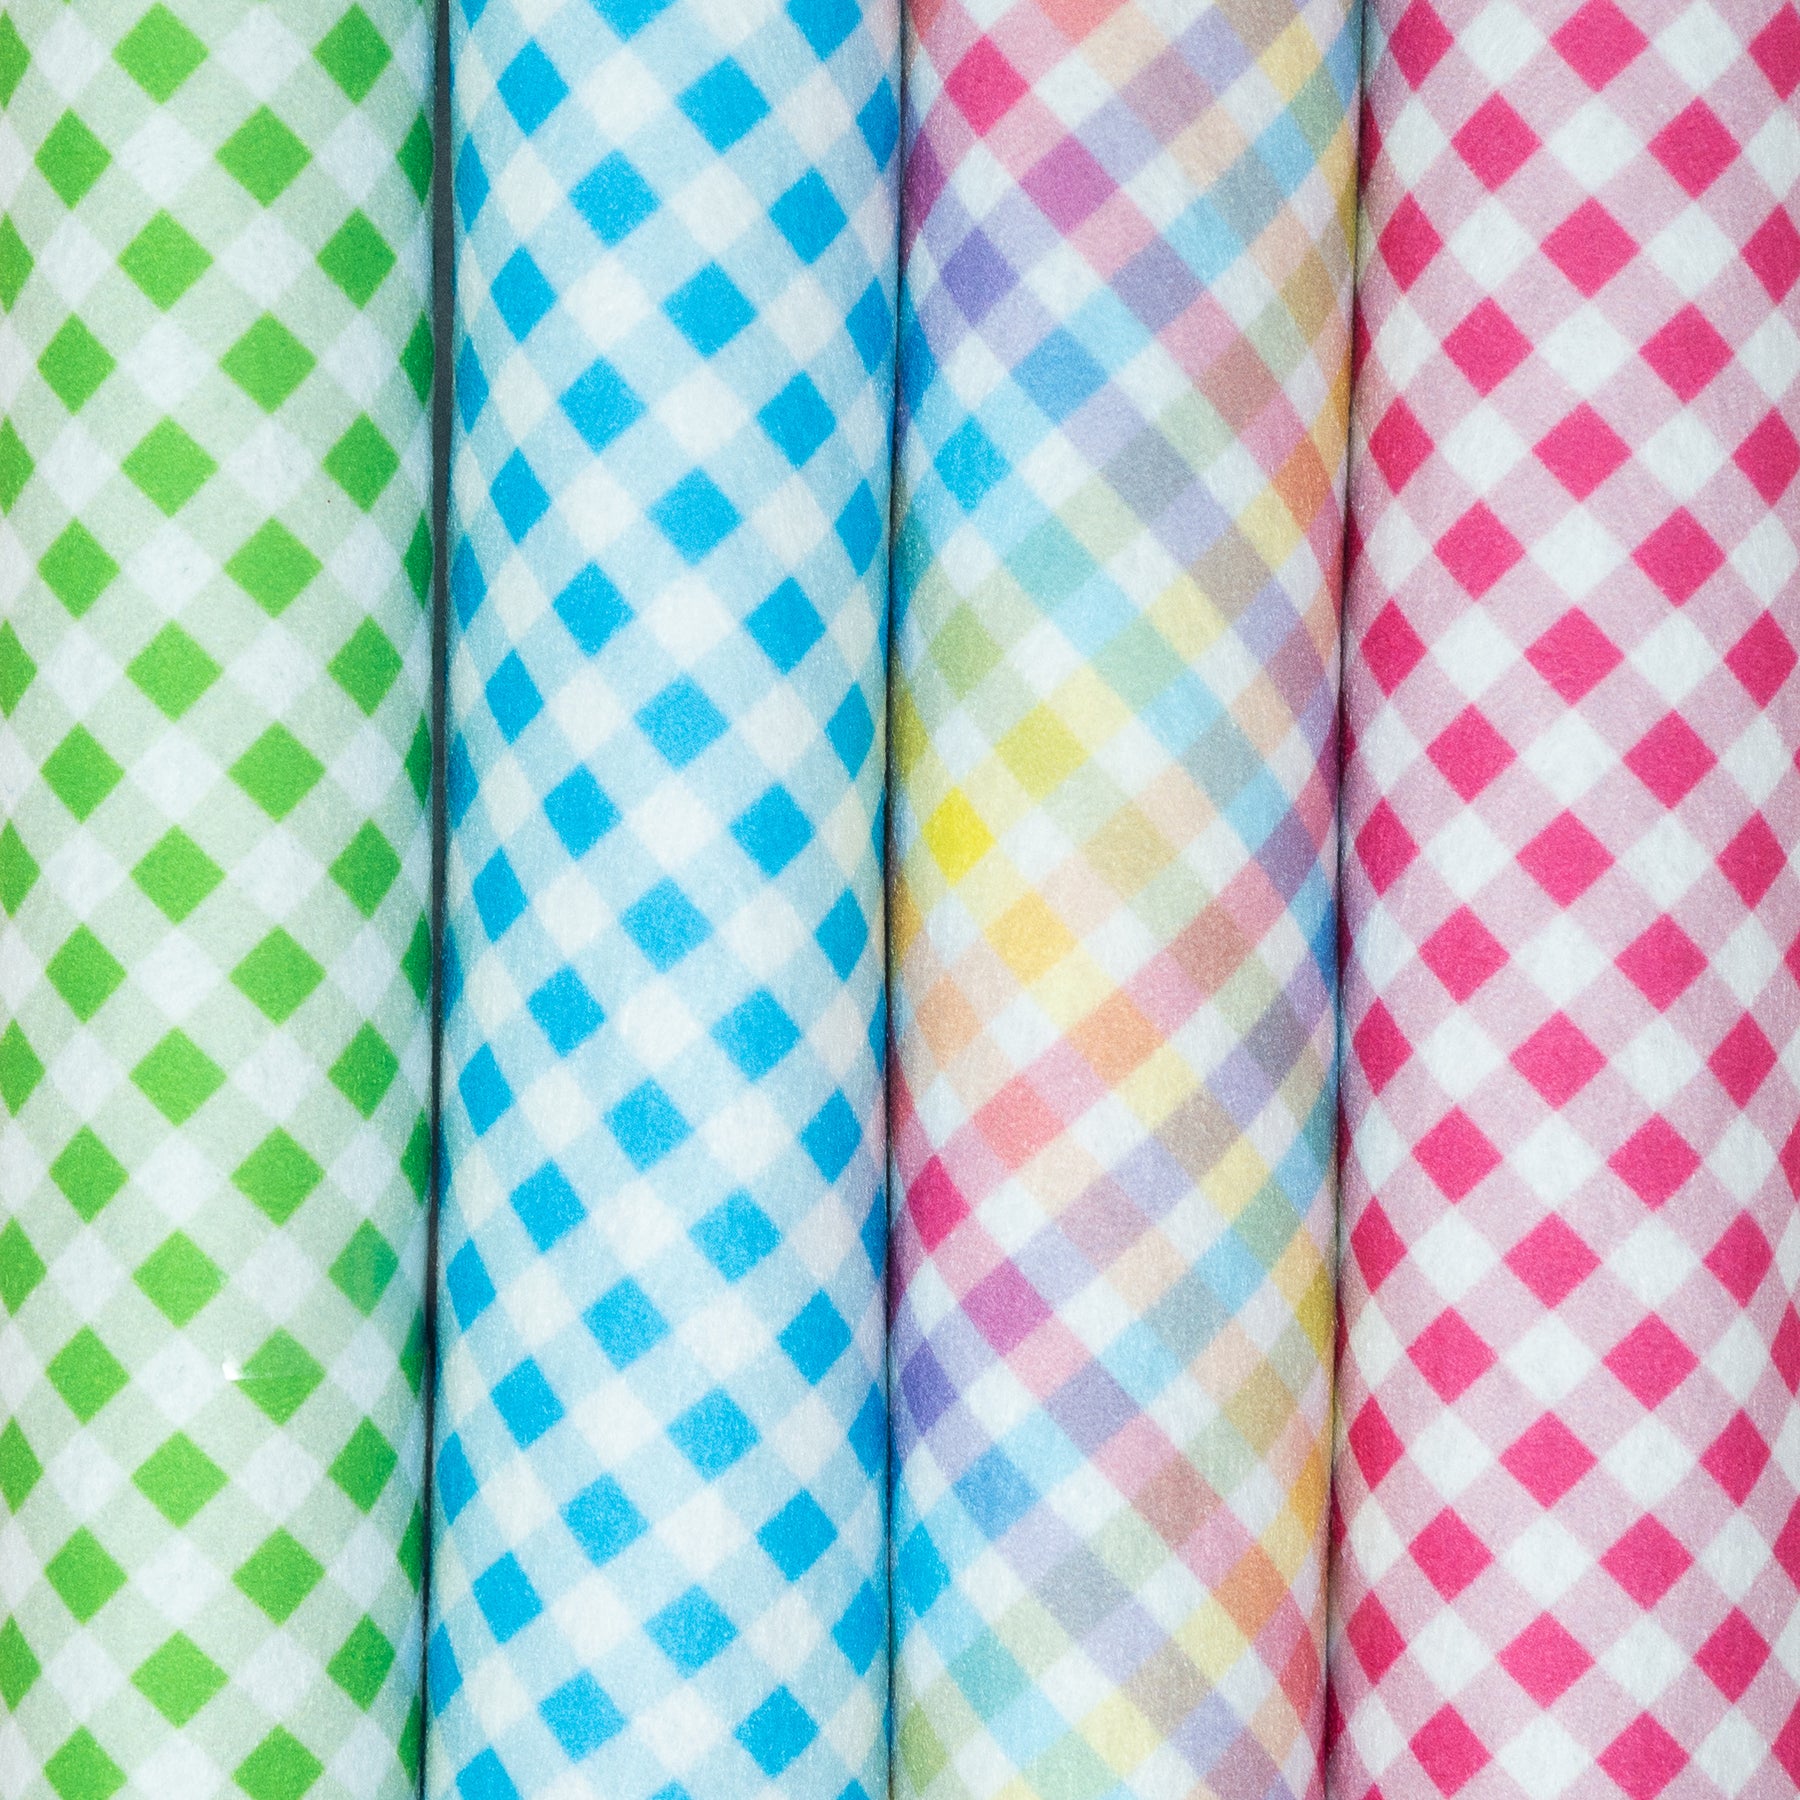 Close-up of felt fabric sheets stacked on top of each other in the colors  of the rainbow spectrum Stock Photo by Yuliasis